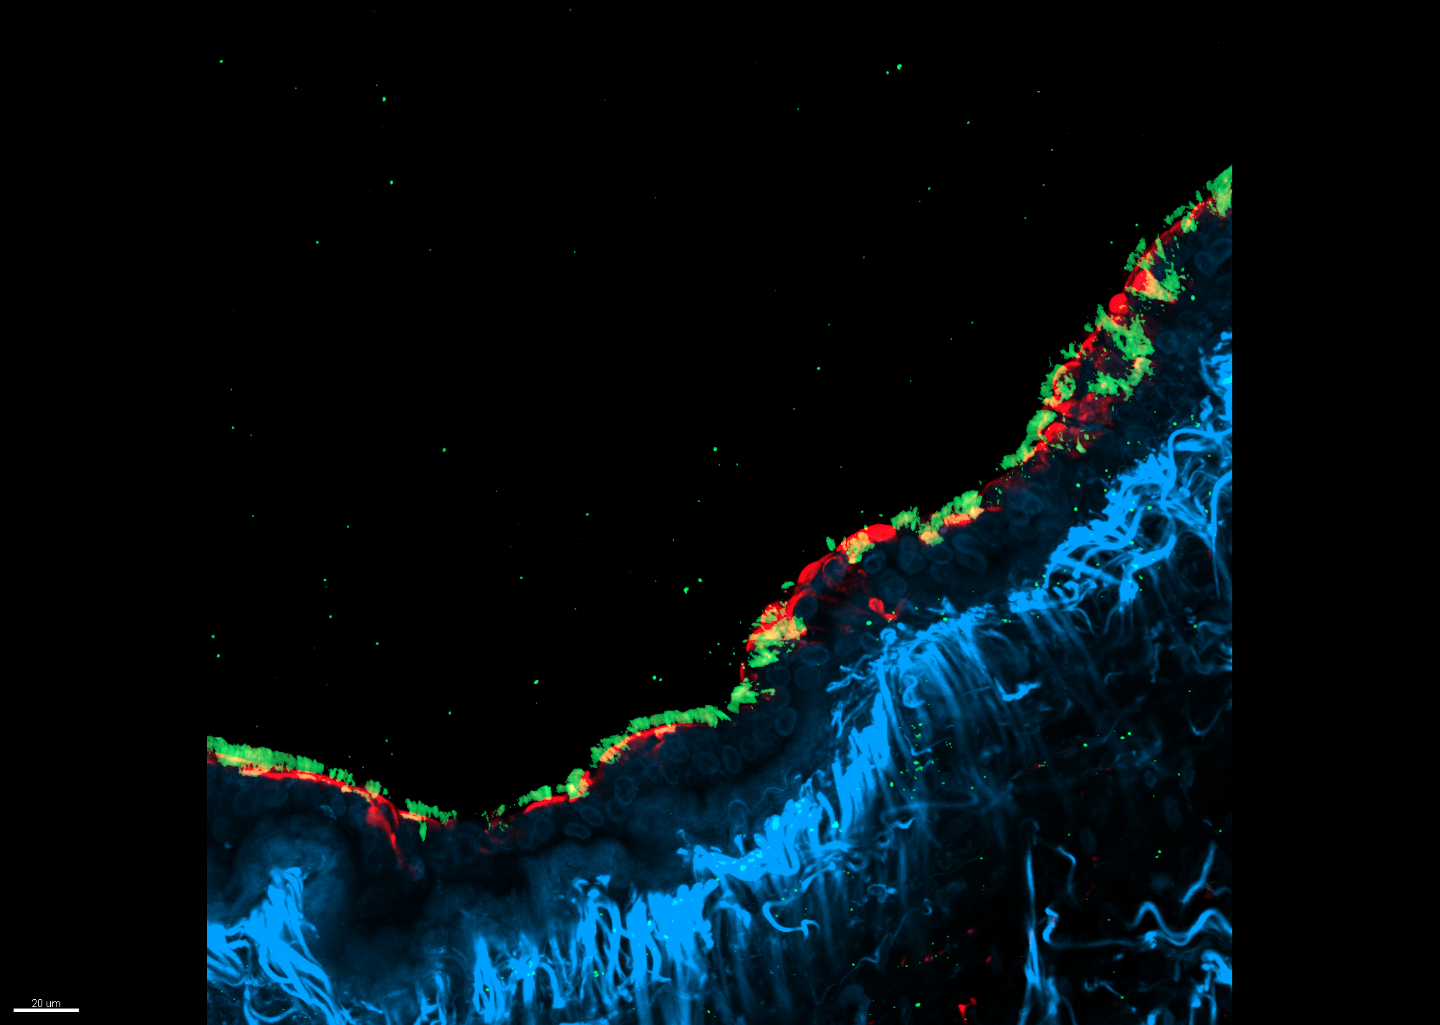 The efficiency of the RNAi drug candidates was successfully tested in vitro on human precision lung slices infected with parainfluenza viruses (red). The cell nuclei are shown in blue and cilia in green.